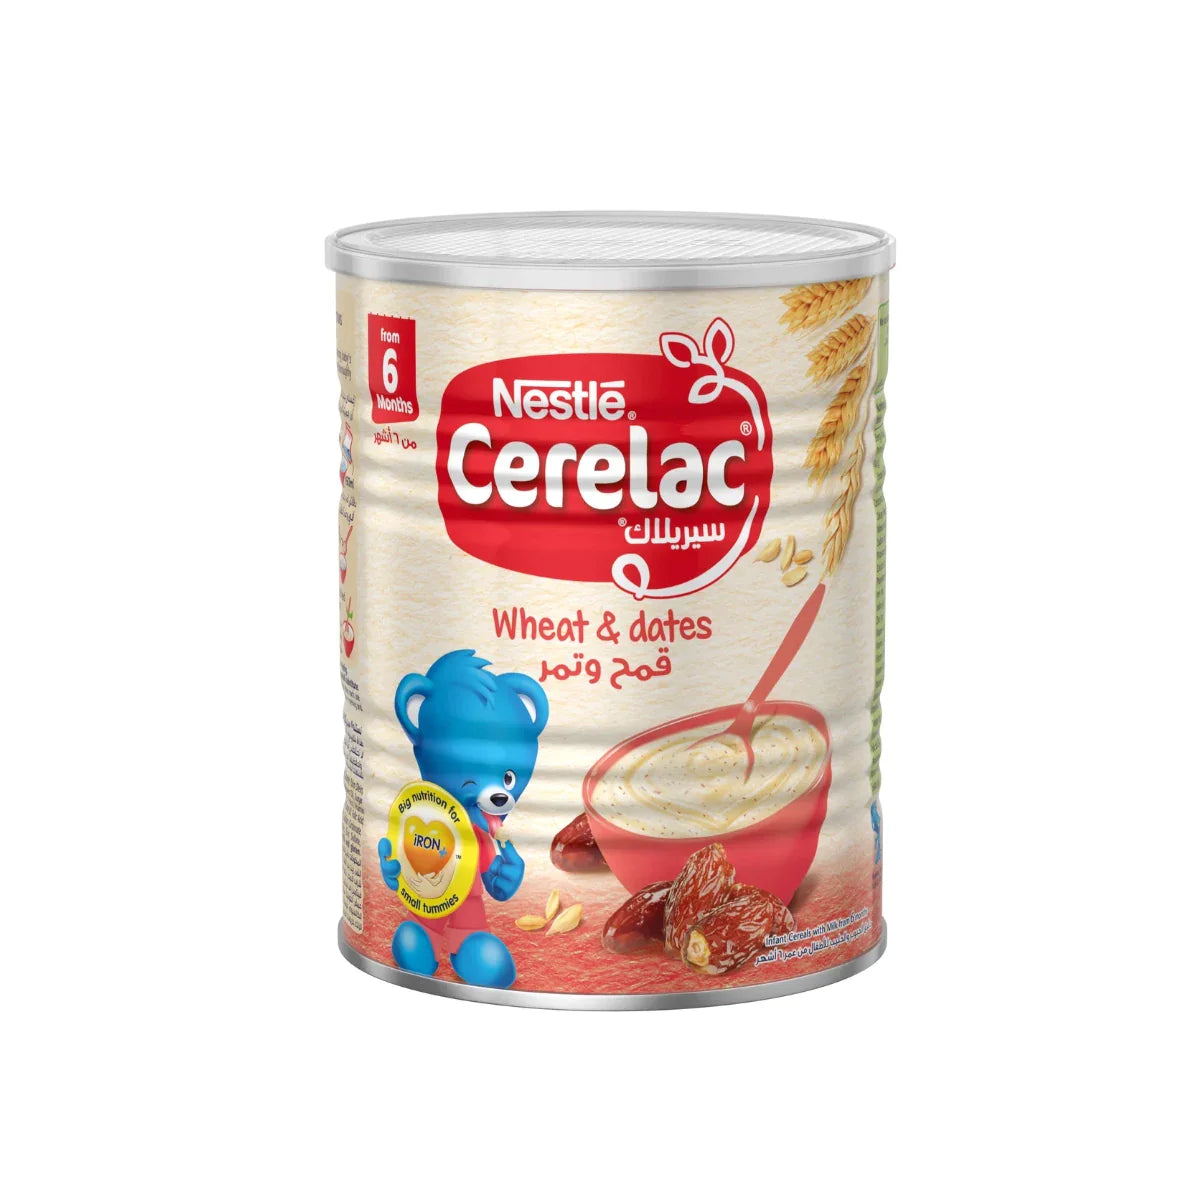 Nestle Cerelac Wheat & Dates From 6 Months 400g - Wellness Shoppee